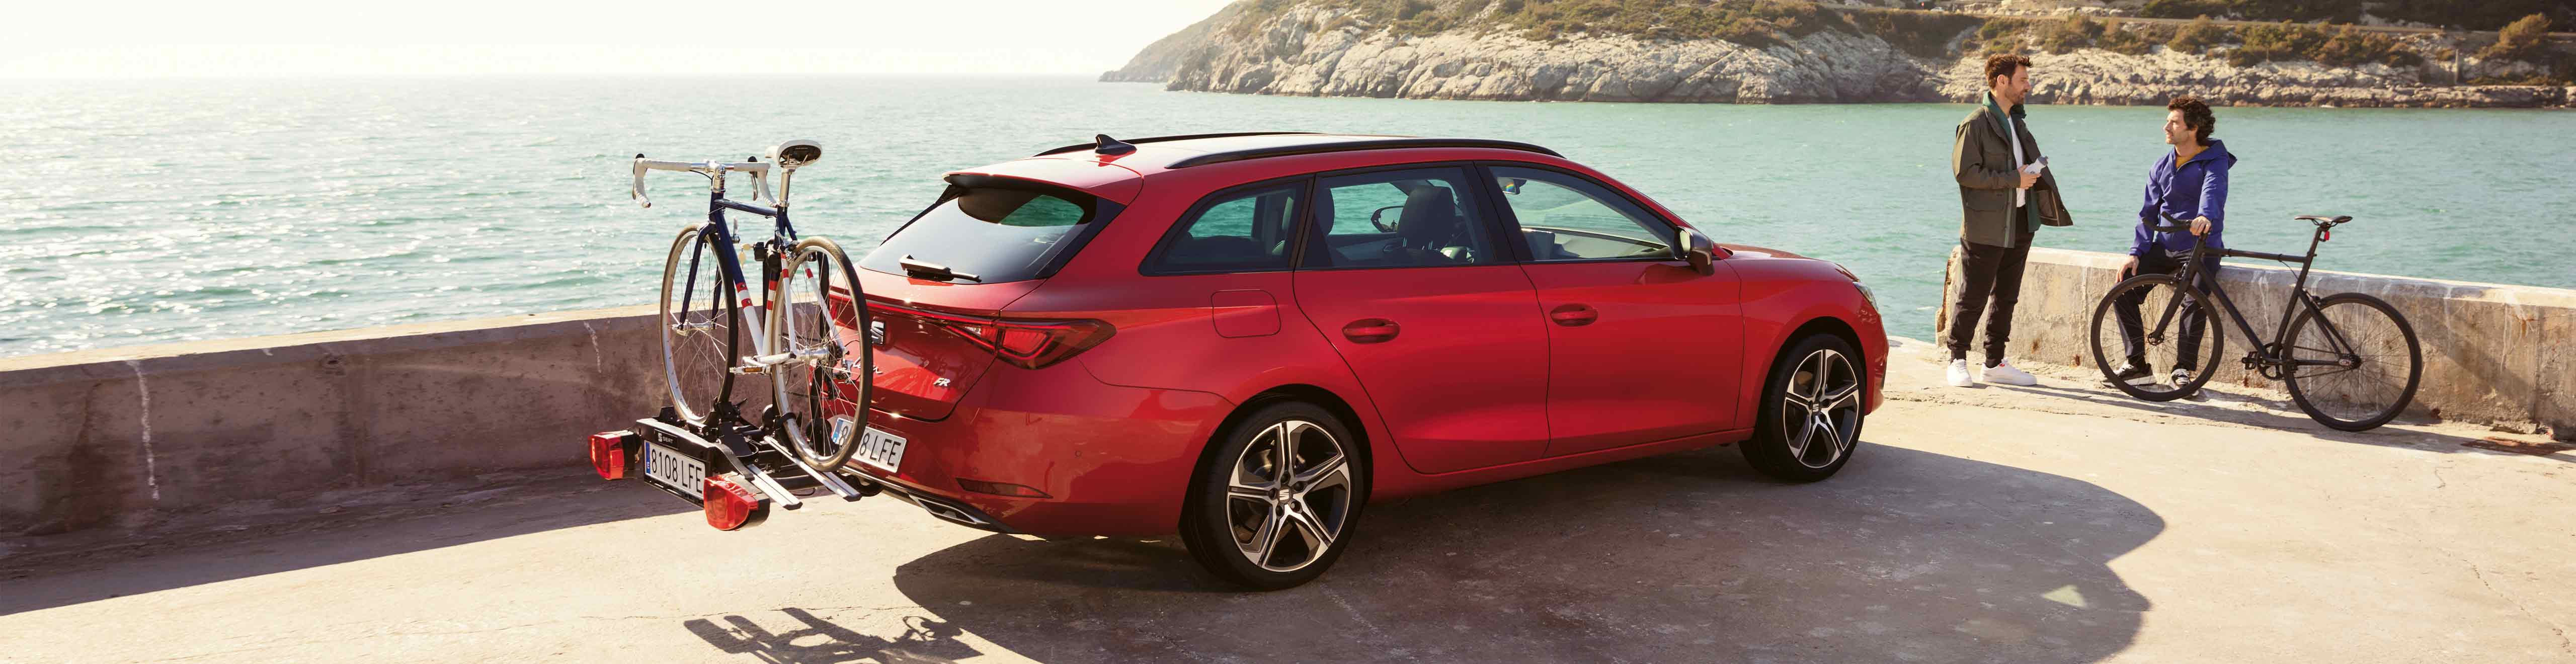 SEAT Leon Sportstourer desired red colour with a bike rack